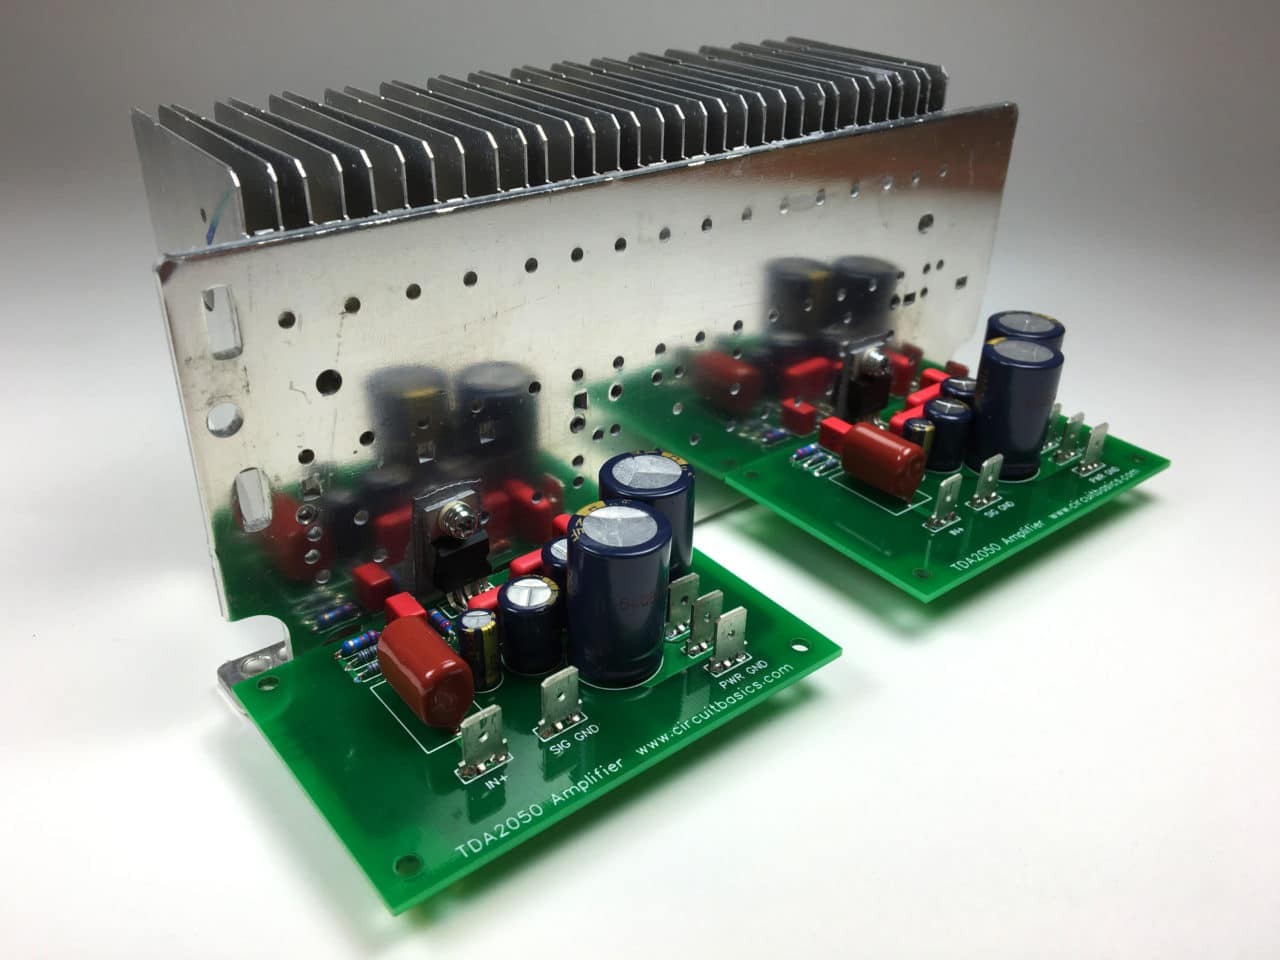 plete TDA2050 Amplifier Design and Construction Assembled PCBs Attached to Heat Sink